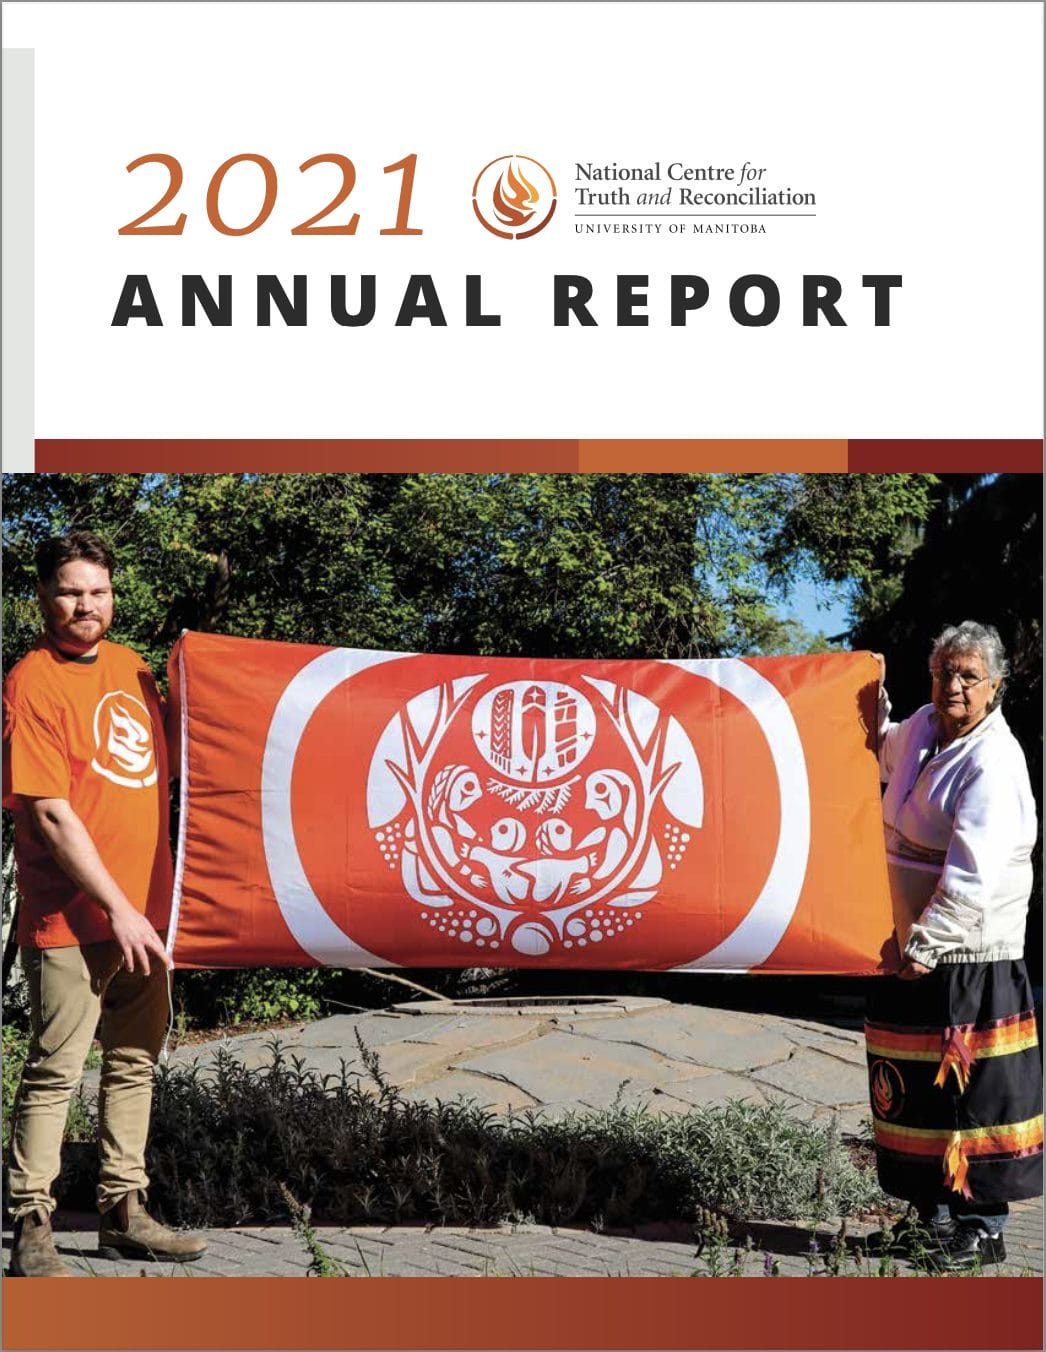 The 2021 NCTR Annual Report